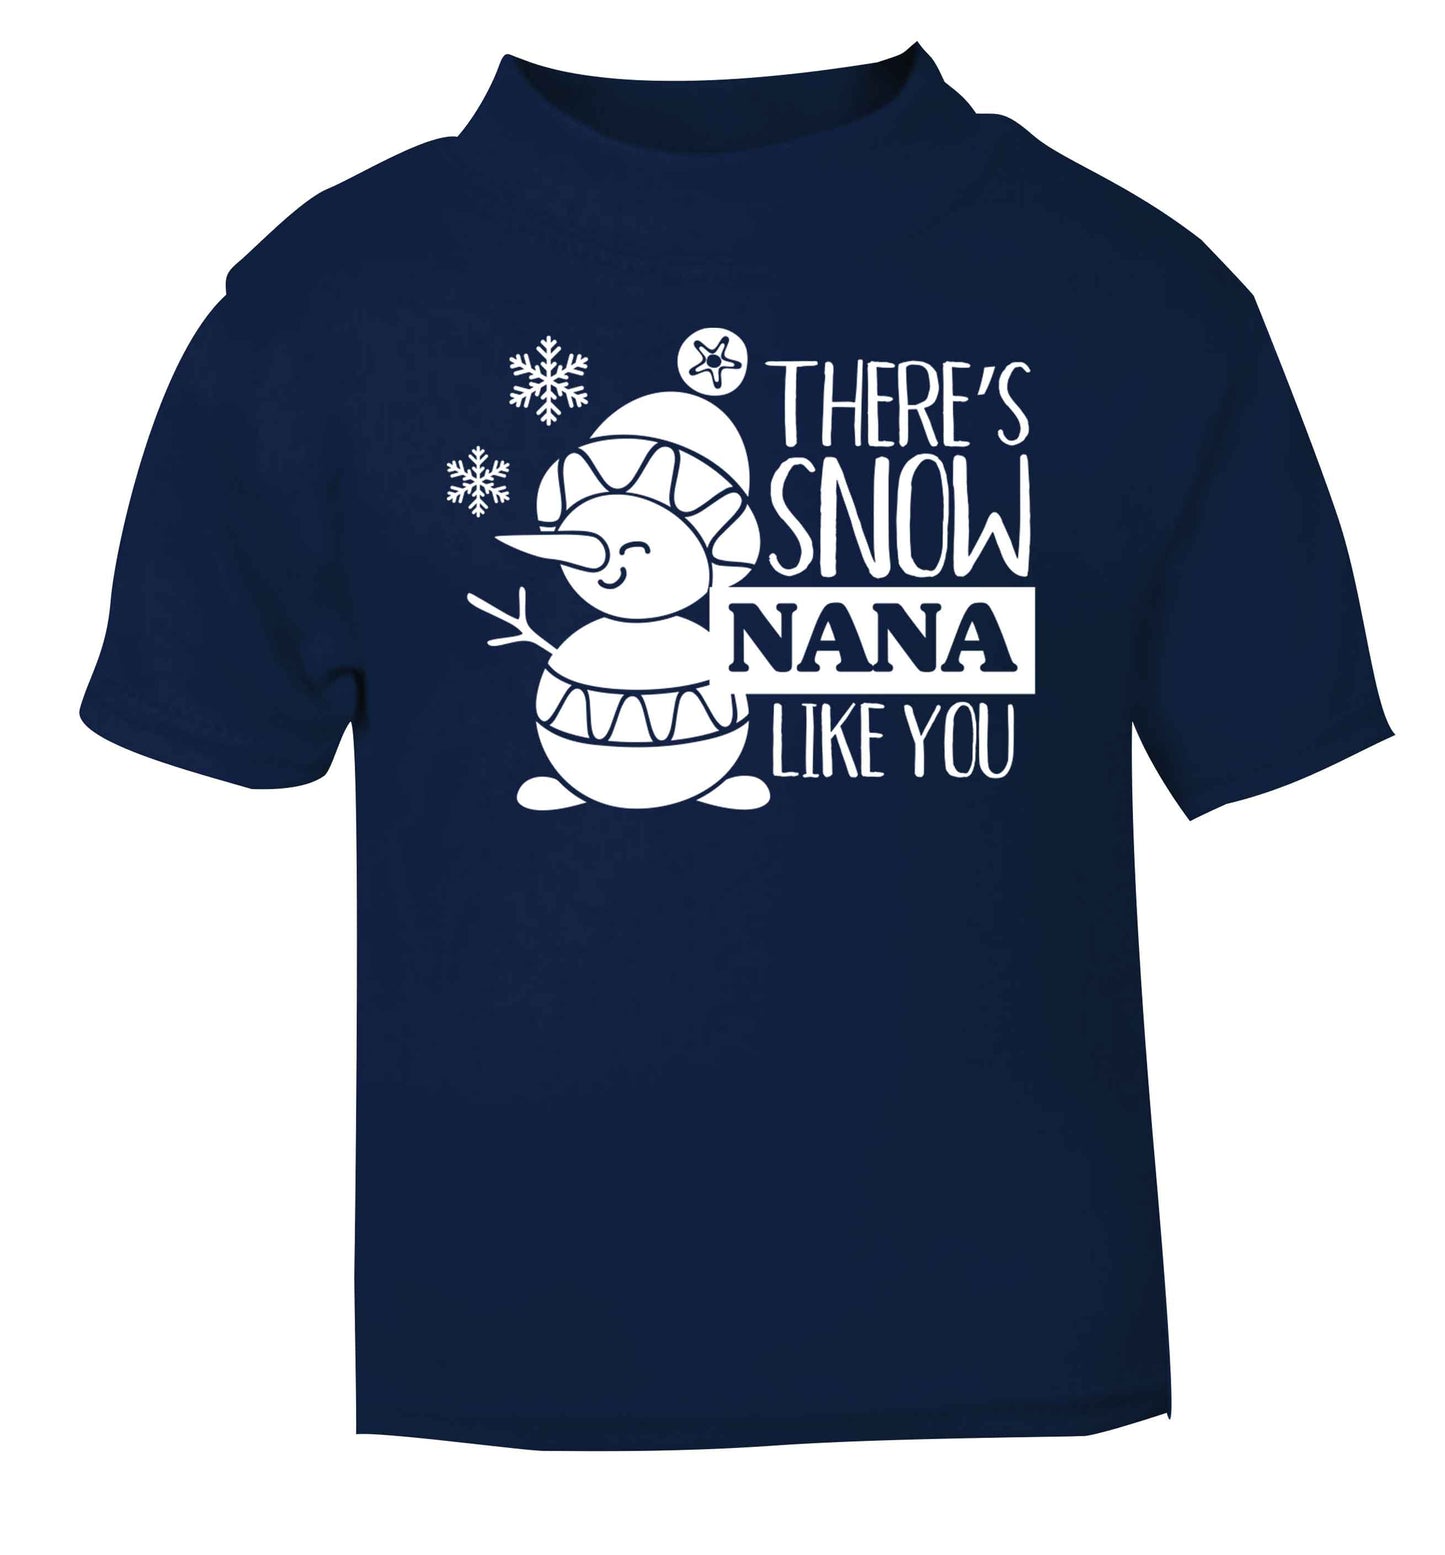 There's snow nana like you navy baby toddler Tshirt 2 Years